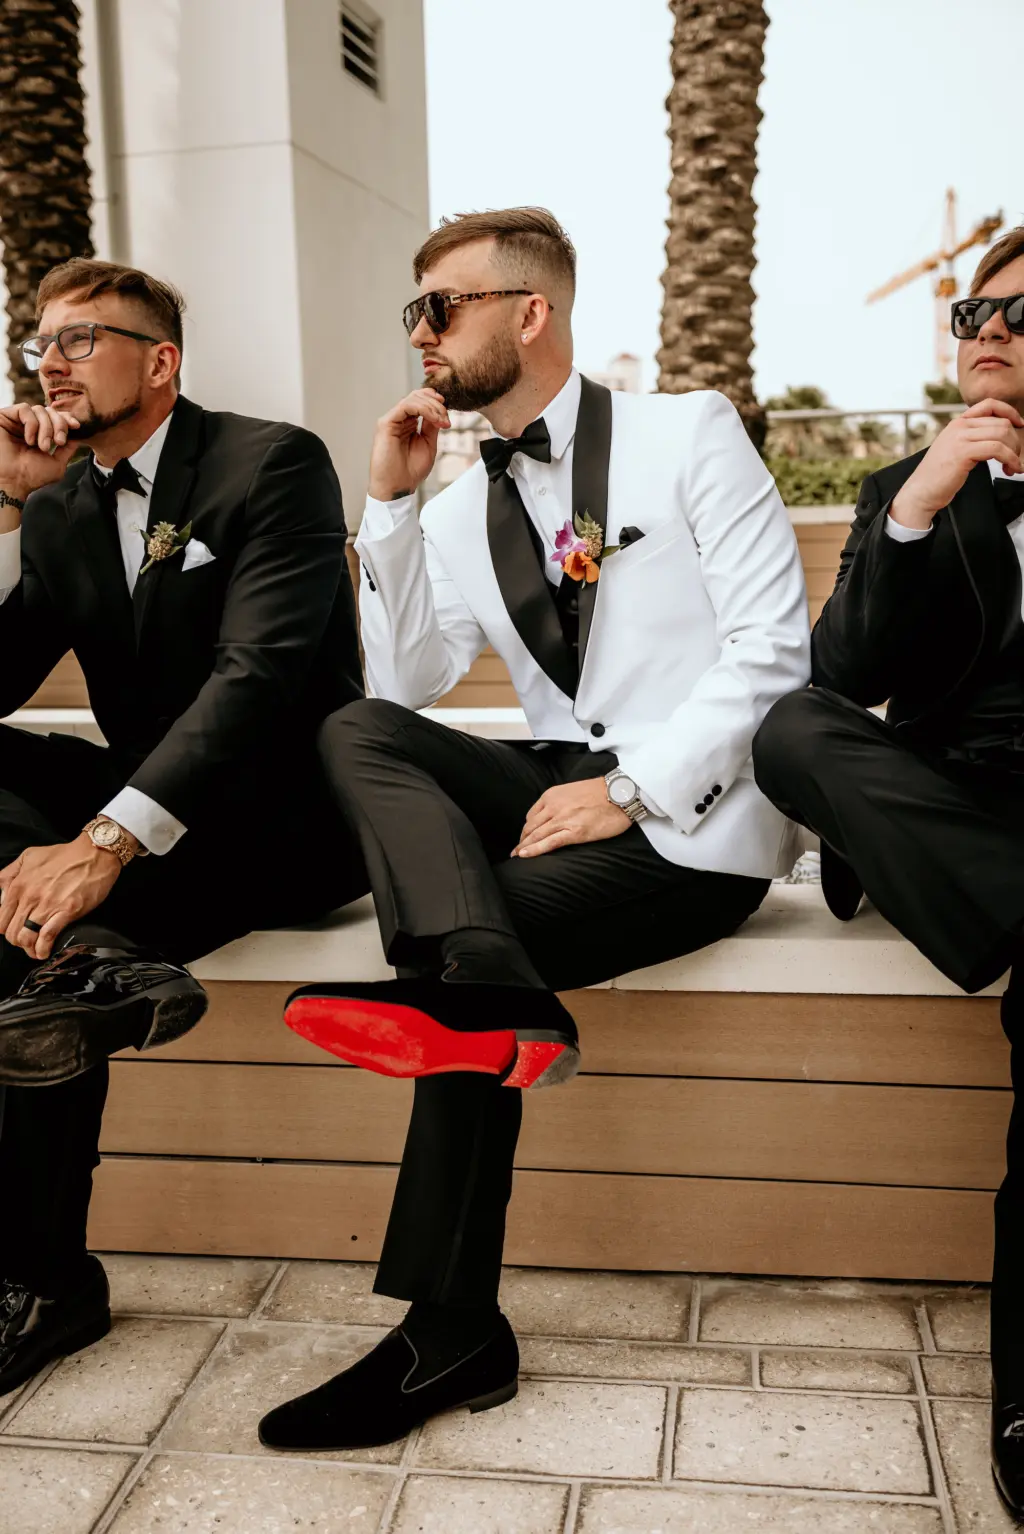 Groom in White Tux and Black Bow Tie and Red Bottom Christian Louboutin Shoes Ideas with Groomsmen in Black Suits